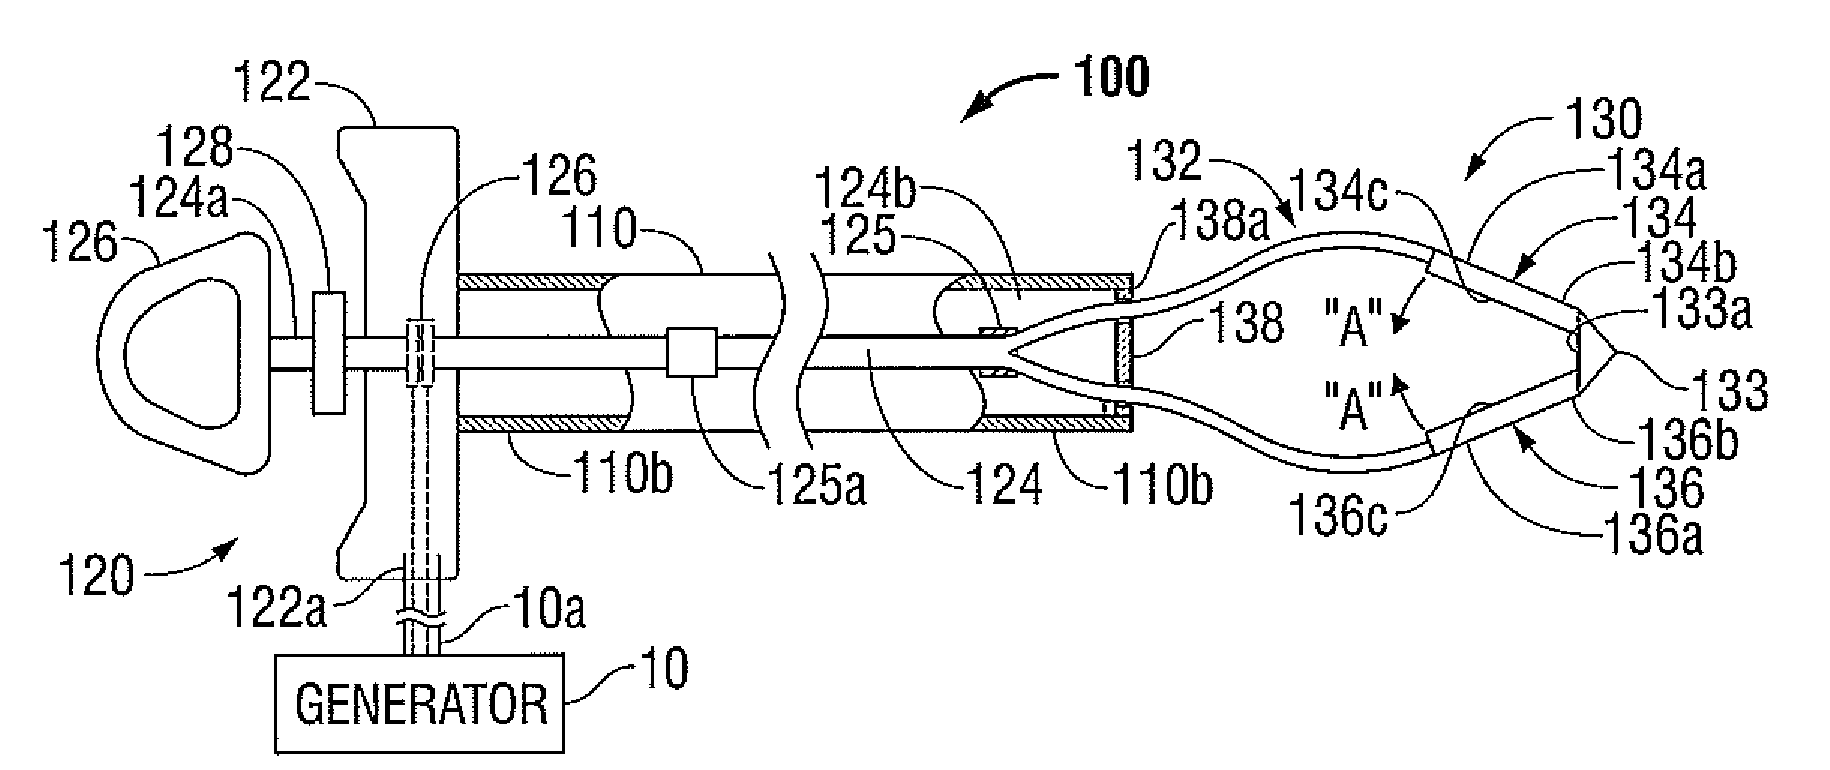 Polyp Removal Device and Method of Use